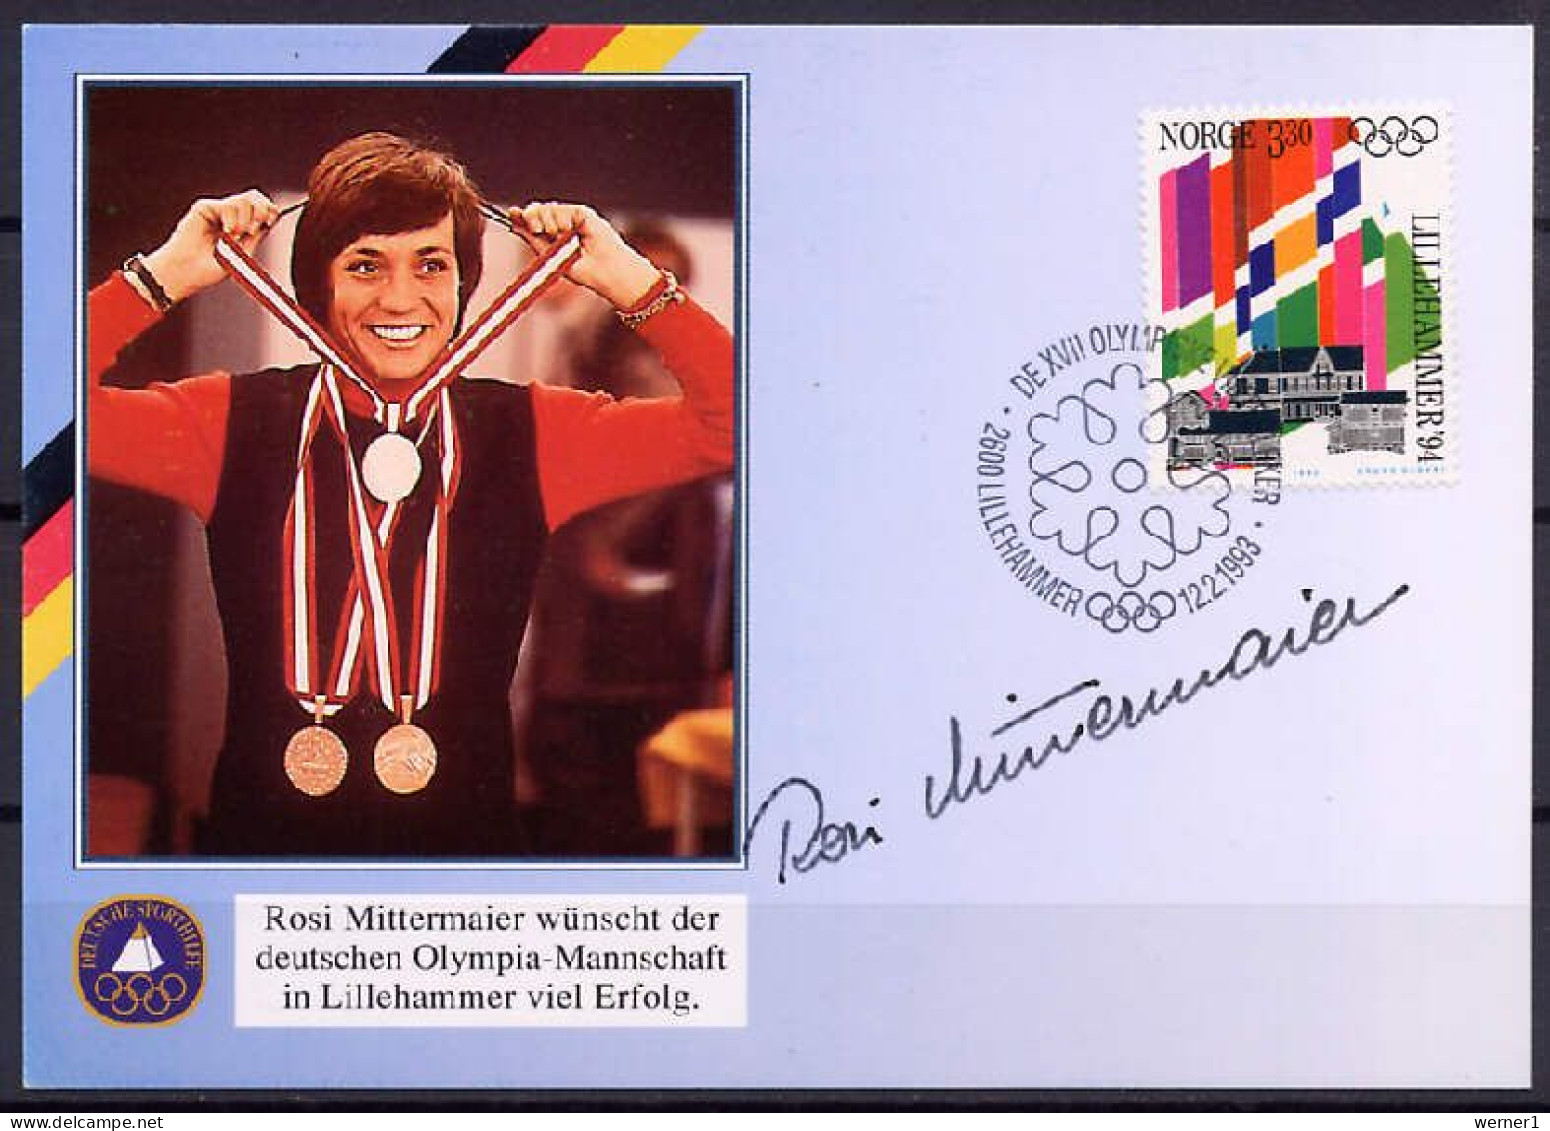 Norway 1993 Olympic Games Lillehammer Autograph Card With Signature Of Rosi Mittermaier - Inverno1994: Lillehammer